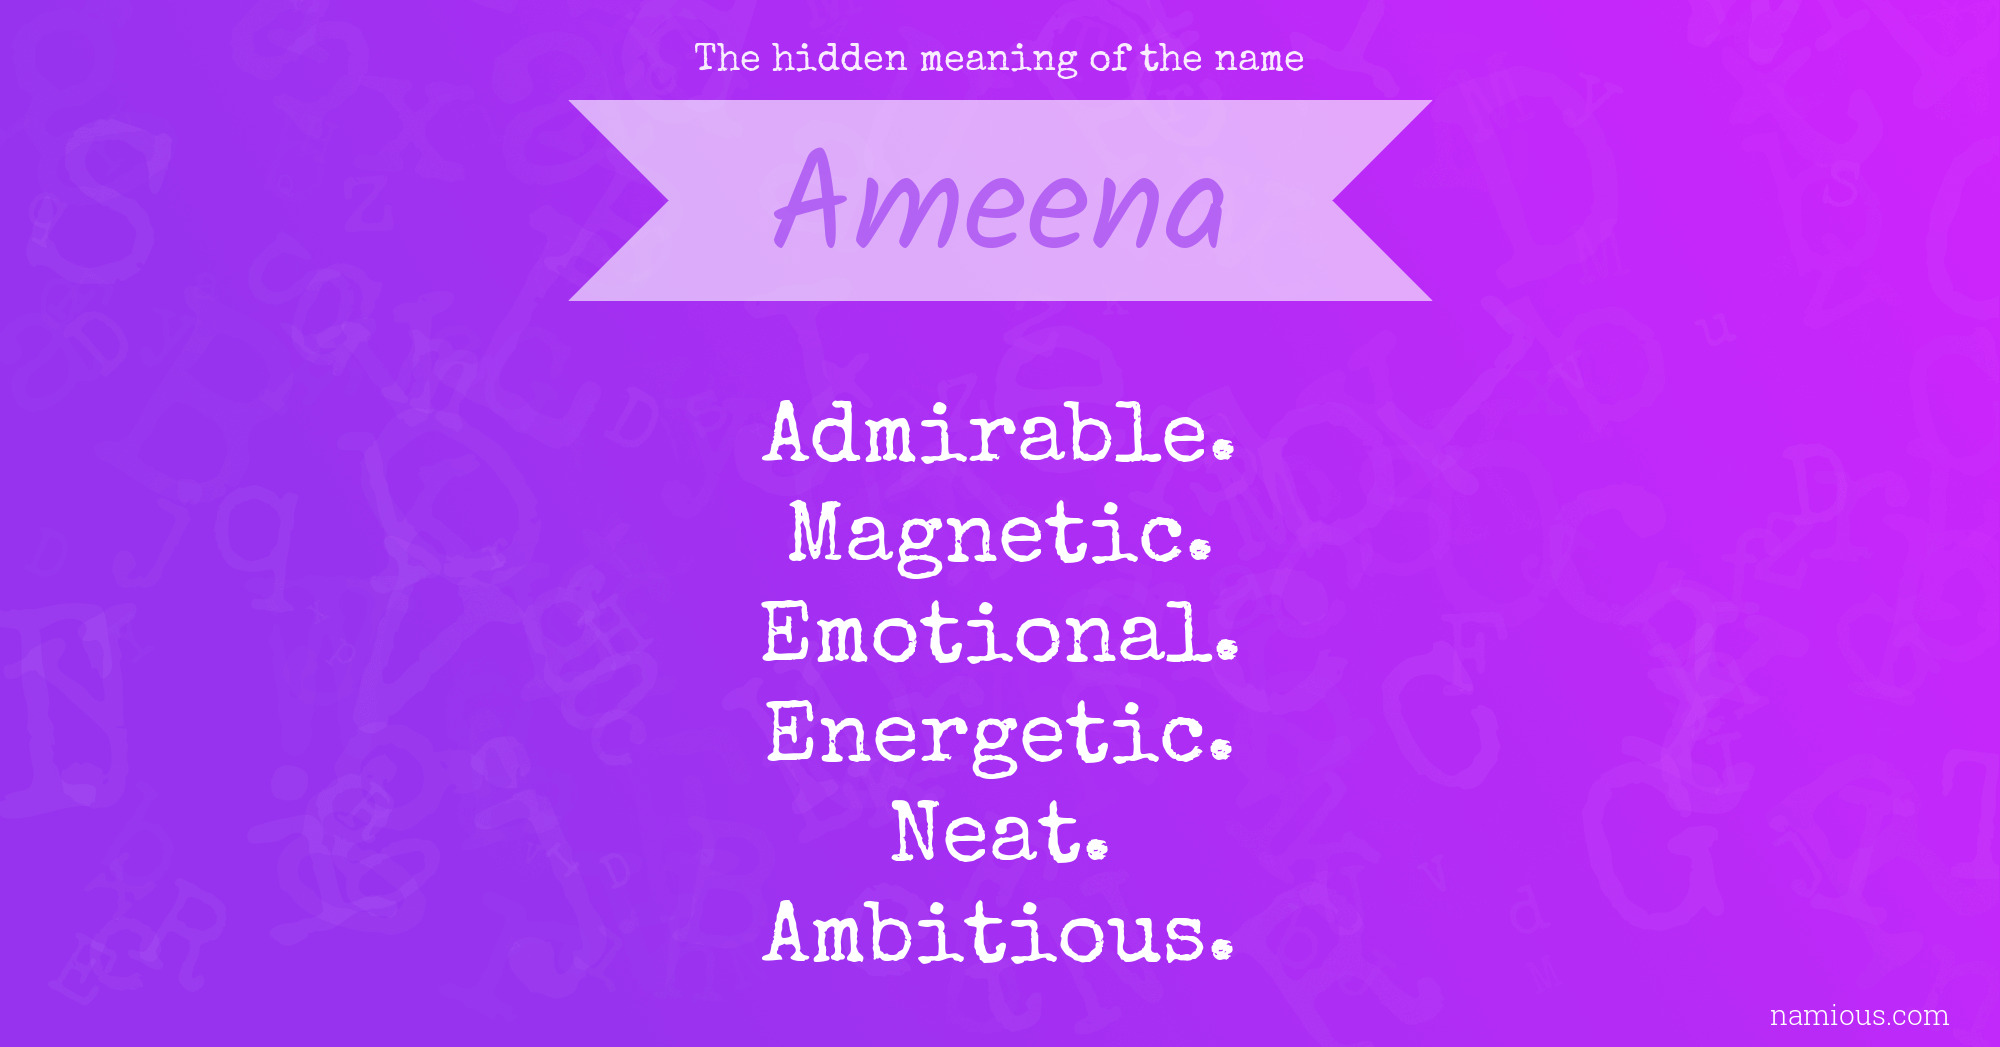 The hidden meaning of the name Ameena